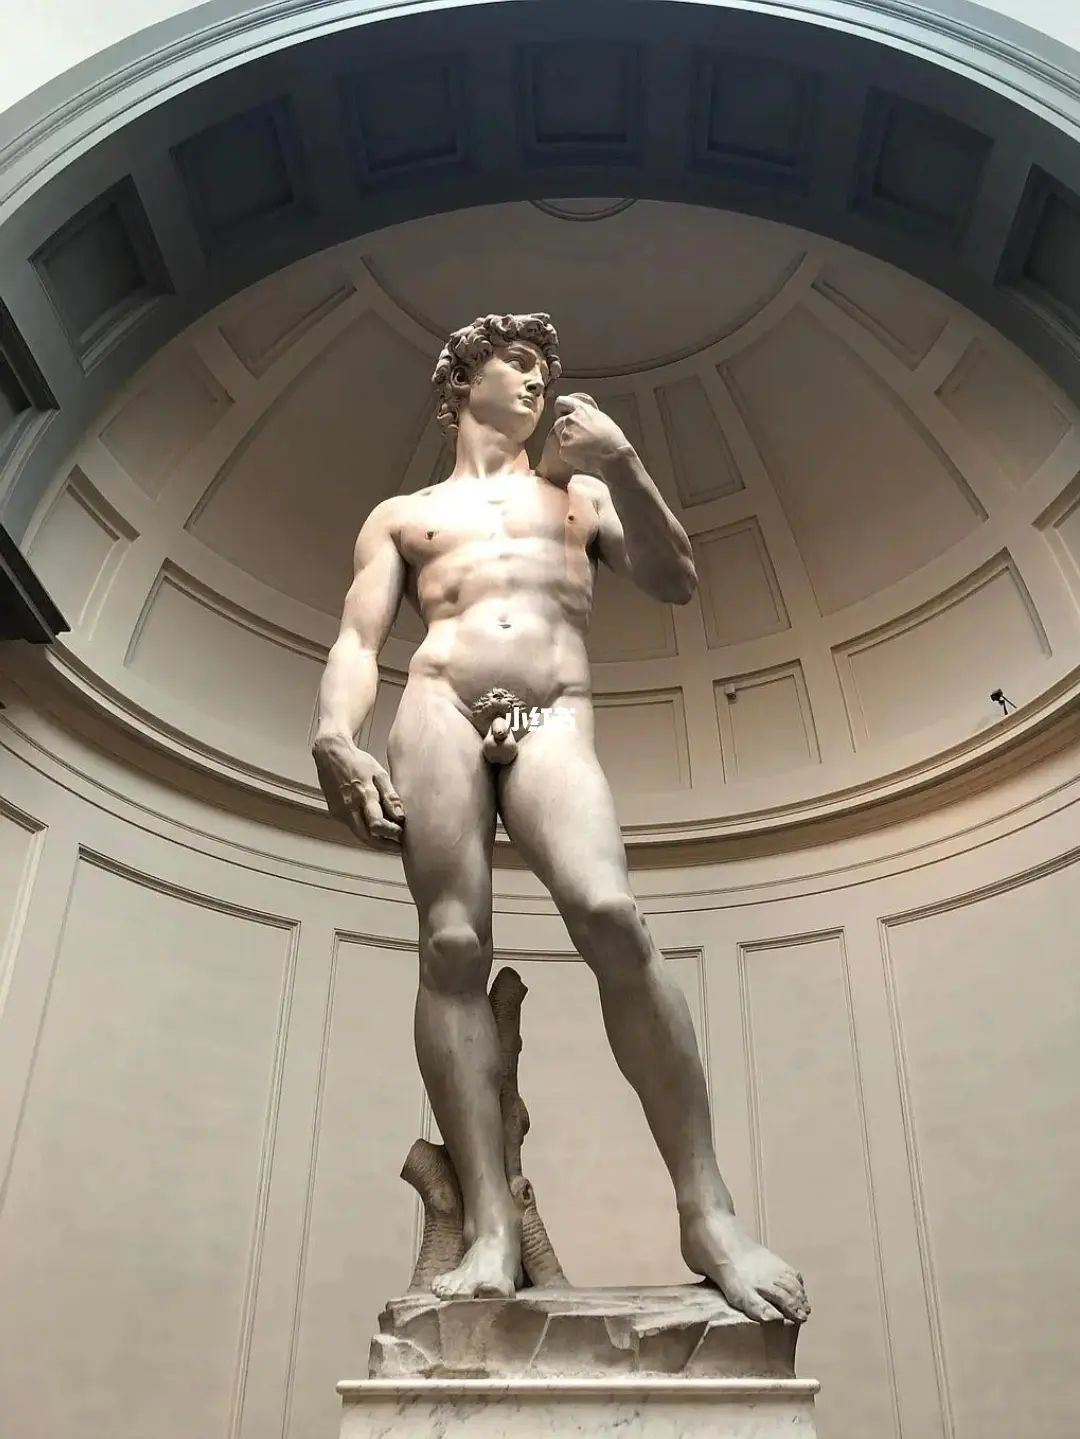 What is the statue of David meaning